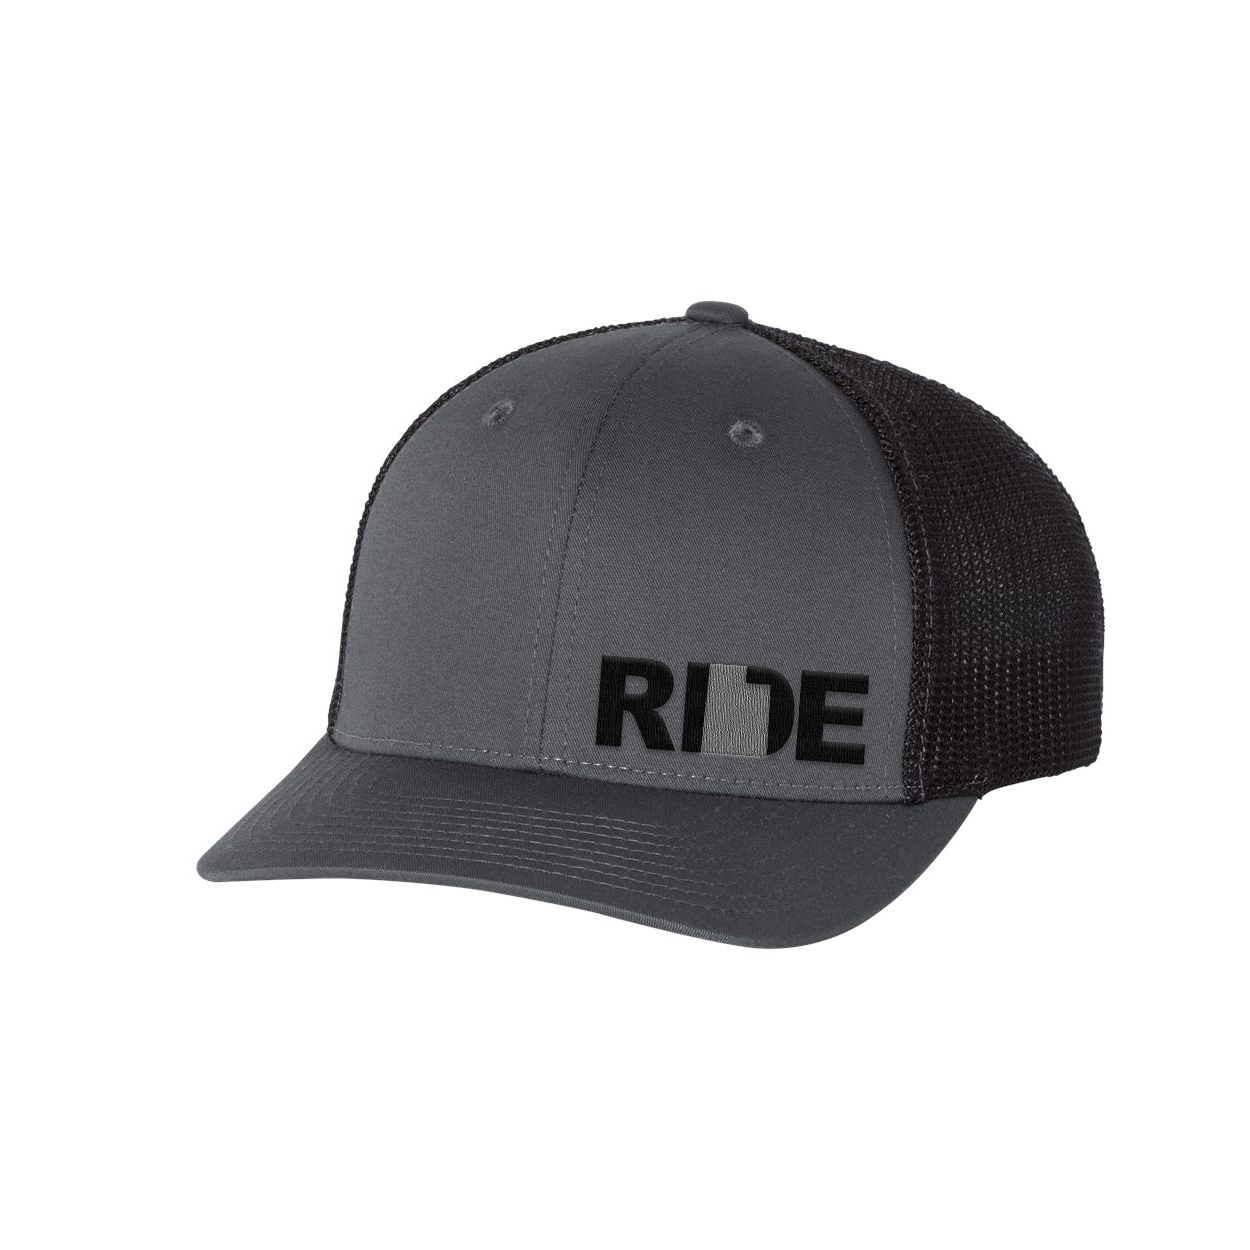 Ride Utah Night Out Embroidered Snapback Trucker Hat Gray/Black